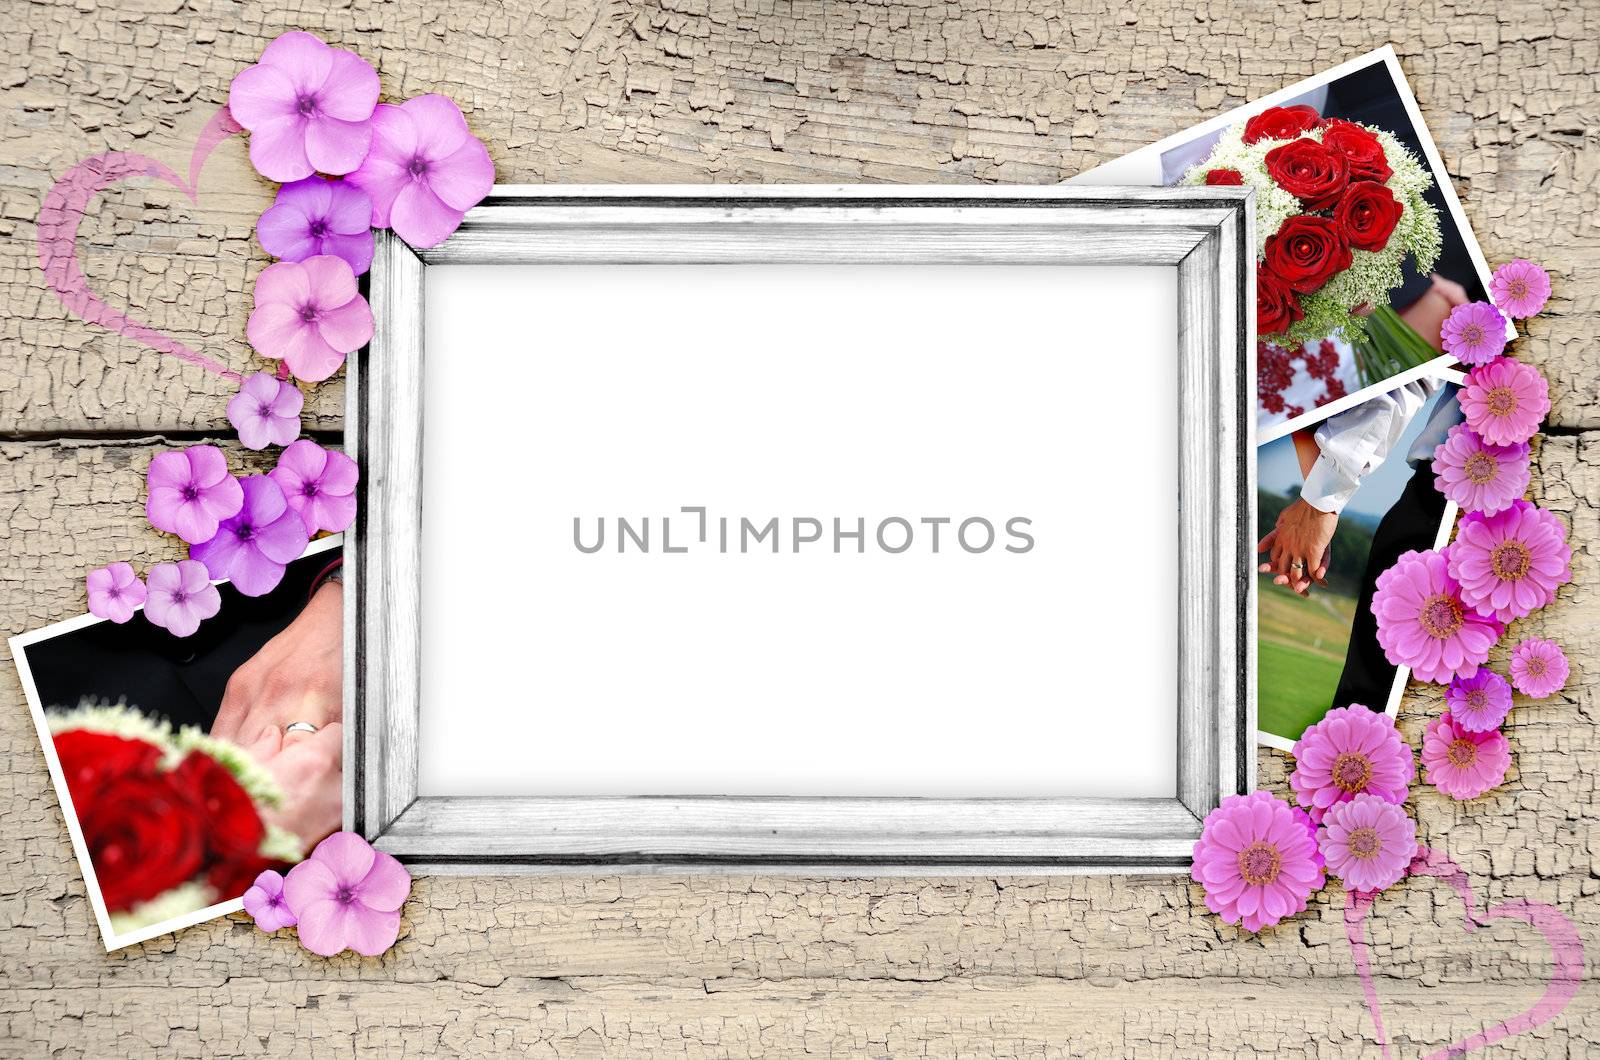 frame of wedding pictures, pictures with the bride and groom